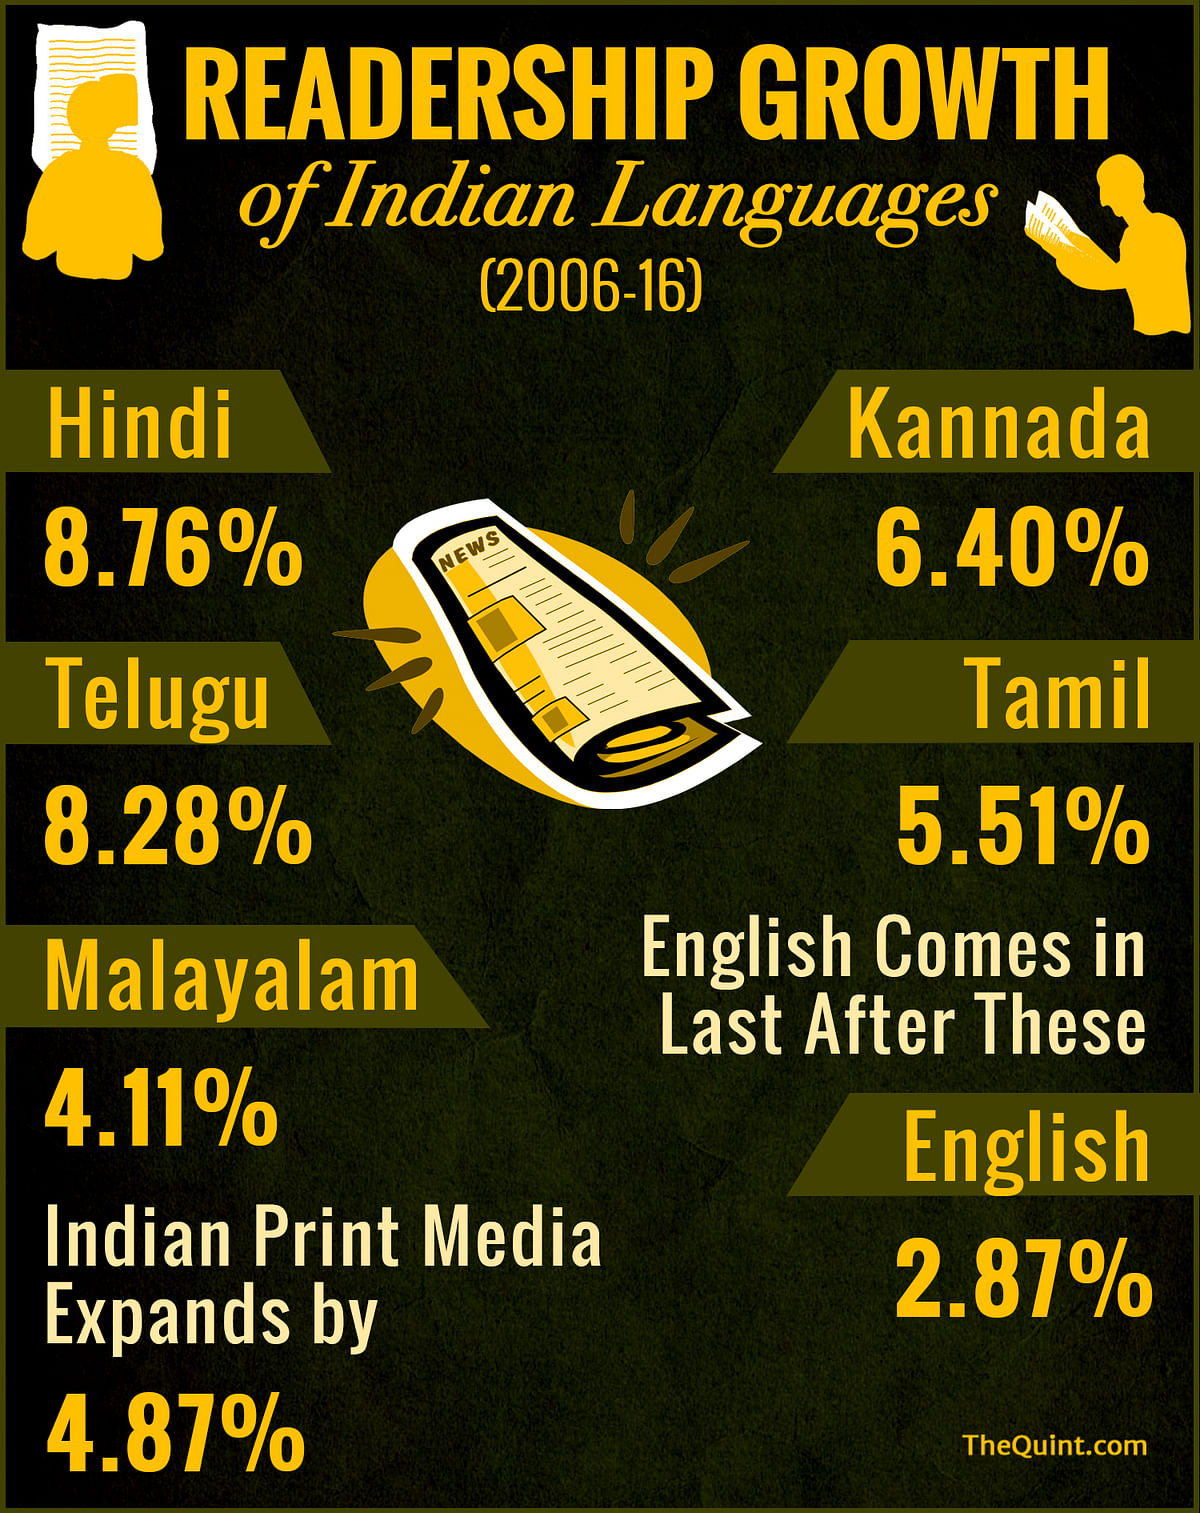 India has defied the global trend of print media losing readership  and how!